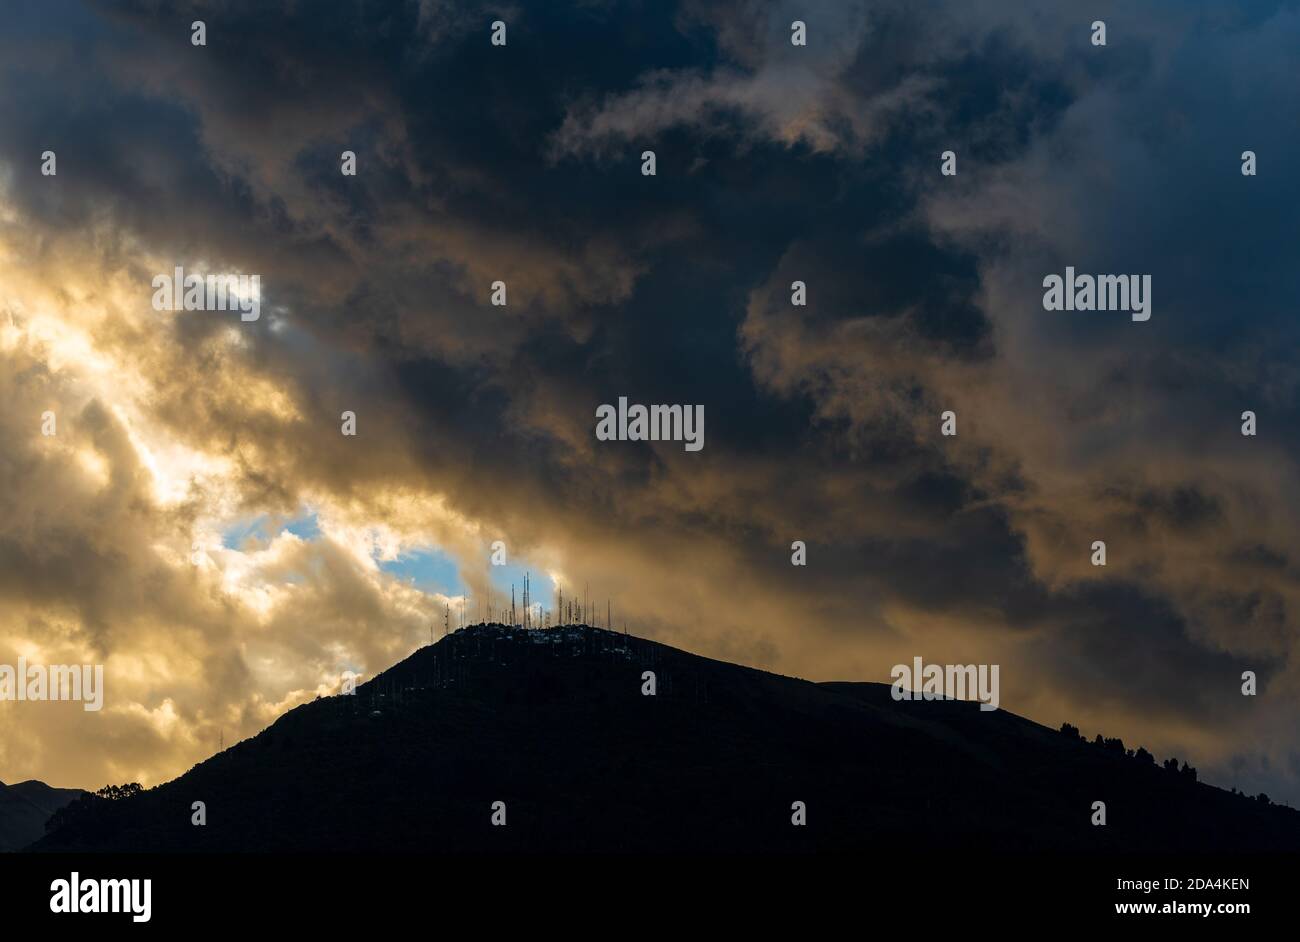 Dramatic rain clouds above the Pichincha volcano at sunset with the arrival of the rainy season in Quito, Andes mountains, Ecuador. Stock Photo